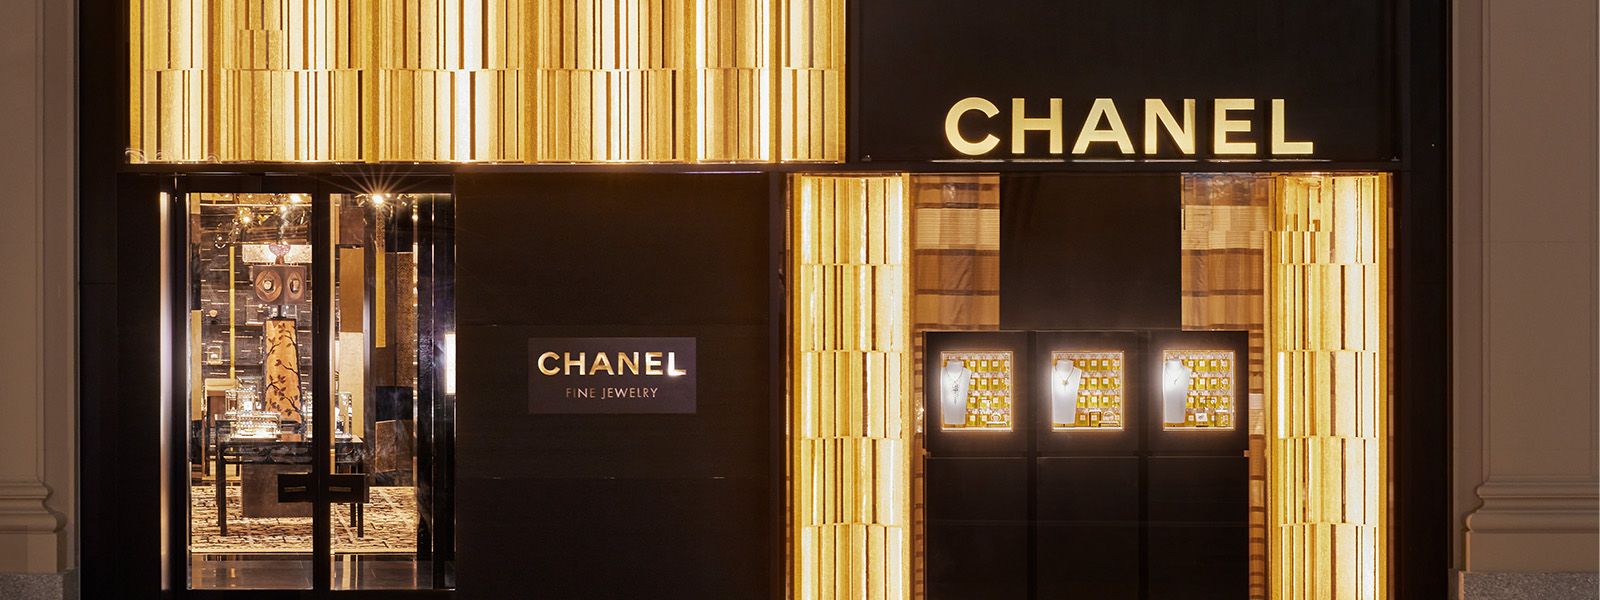 The New Chanel Watches & Fine Jewelry Flagship In New York Will House Some Of The Maison’s Rarest Pieces